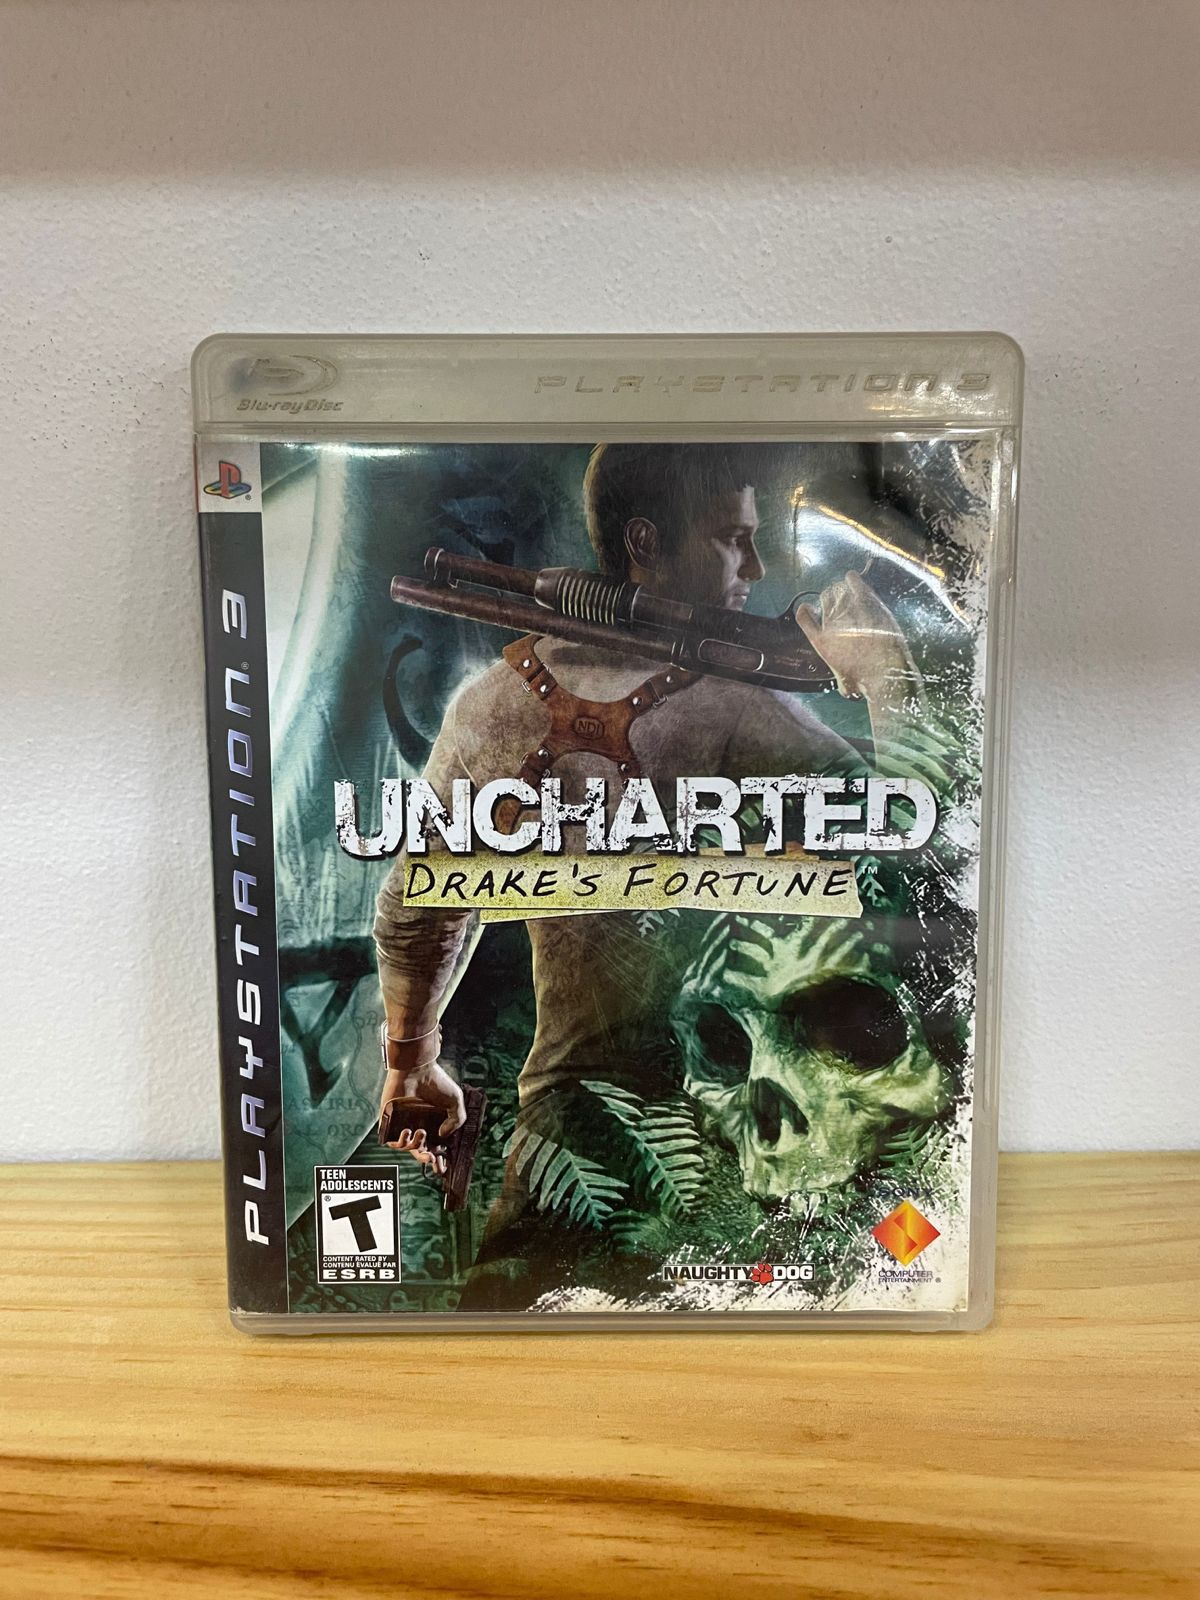 Uncharted: Drake's Fortune PS3